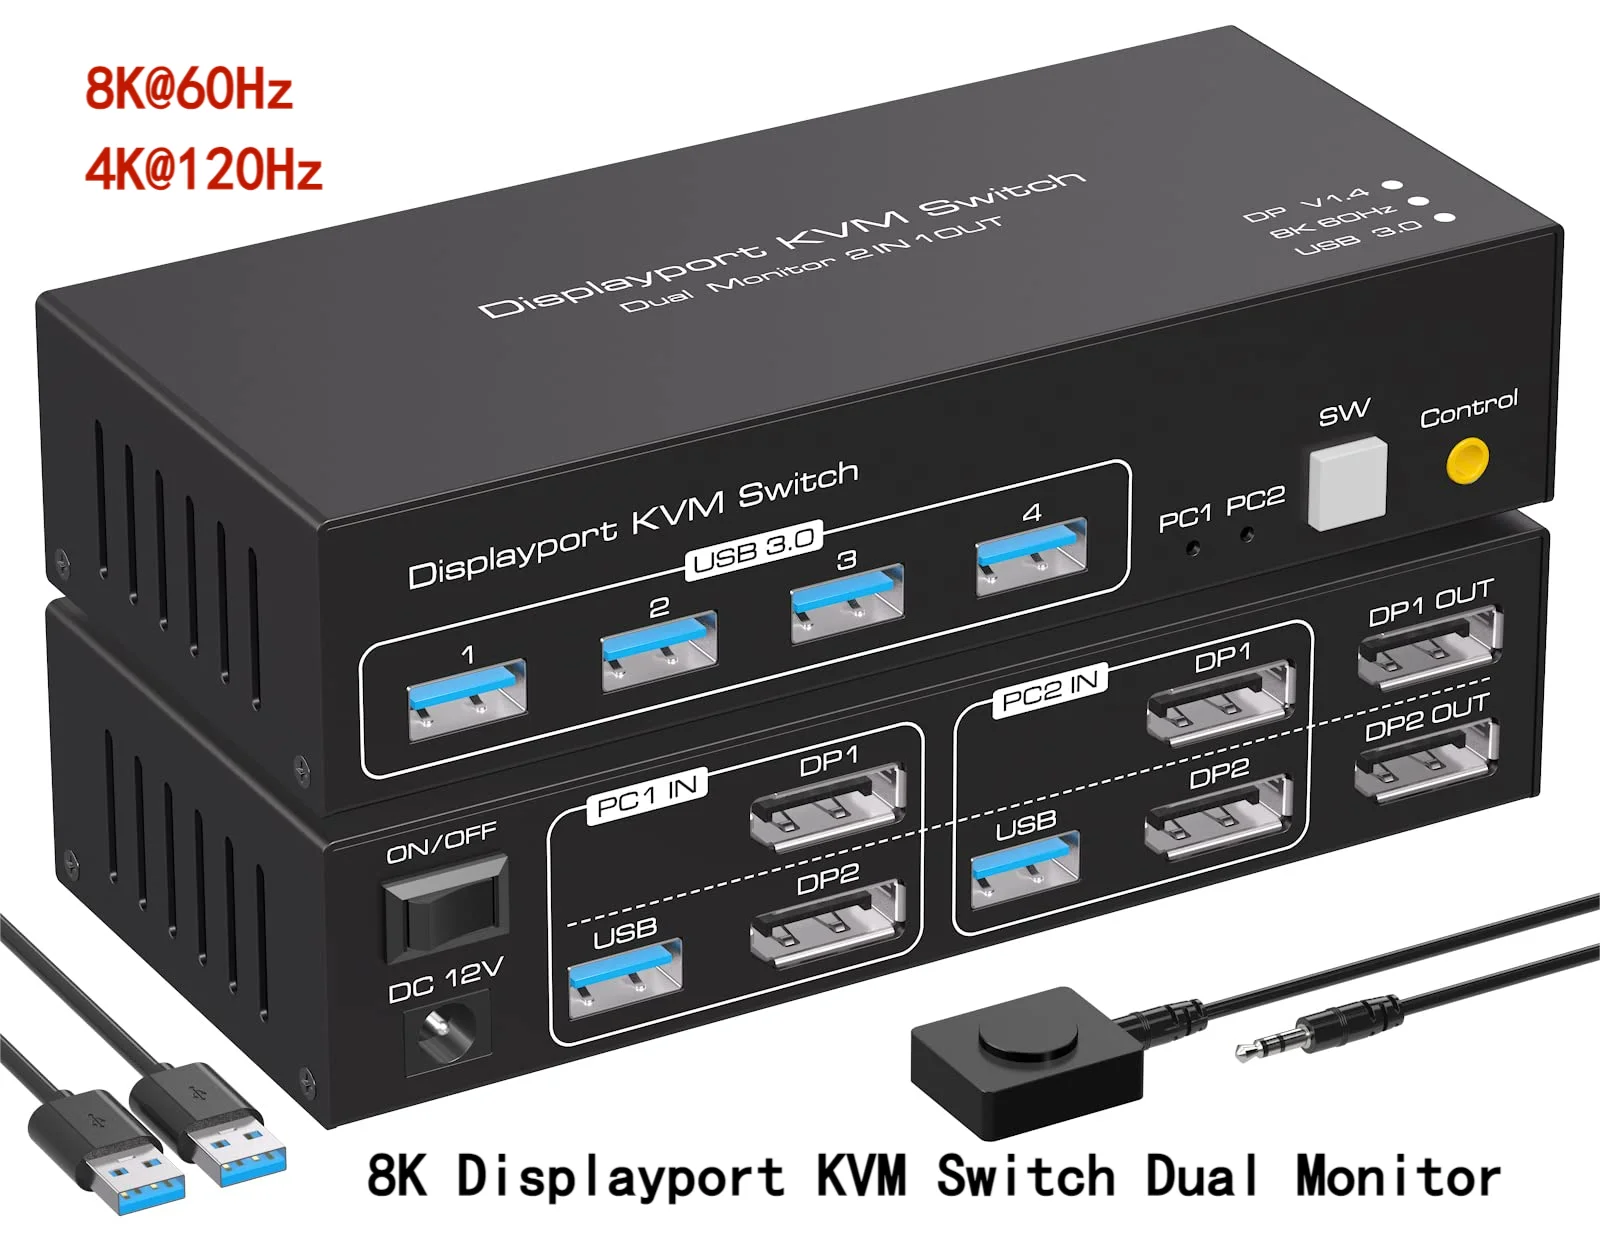 

8K Displayport KVM Switch Dual Monitor 4K@120Hz USB 3.0 KVM Switches for 2 Computers Share 2 Monitors and 4 USB 3.0 Devices 모니터